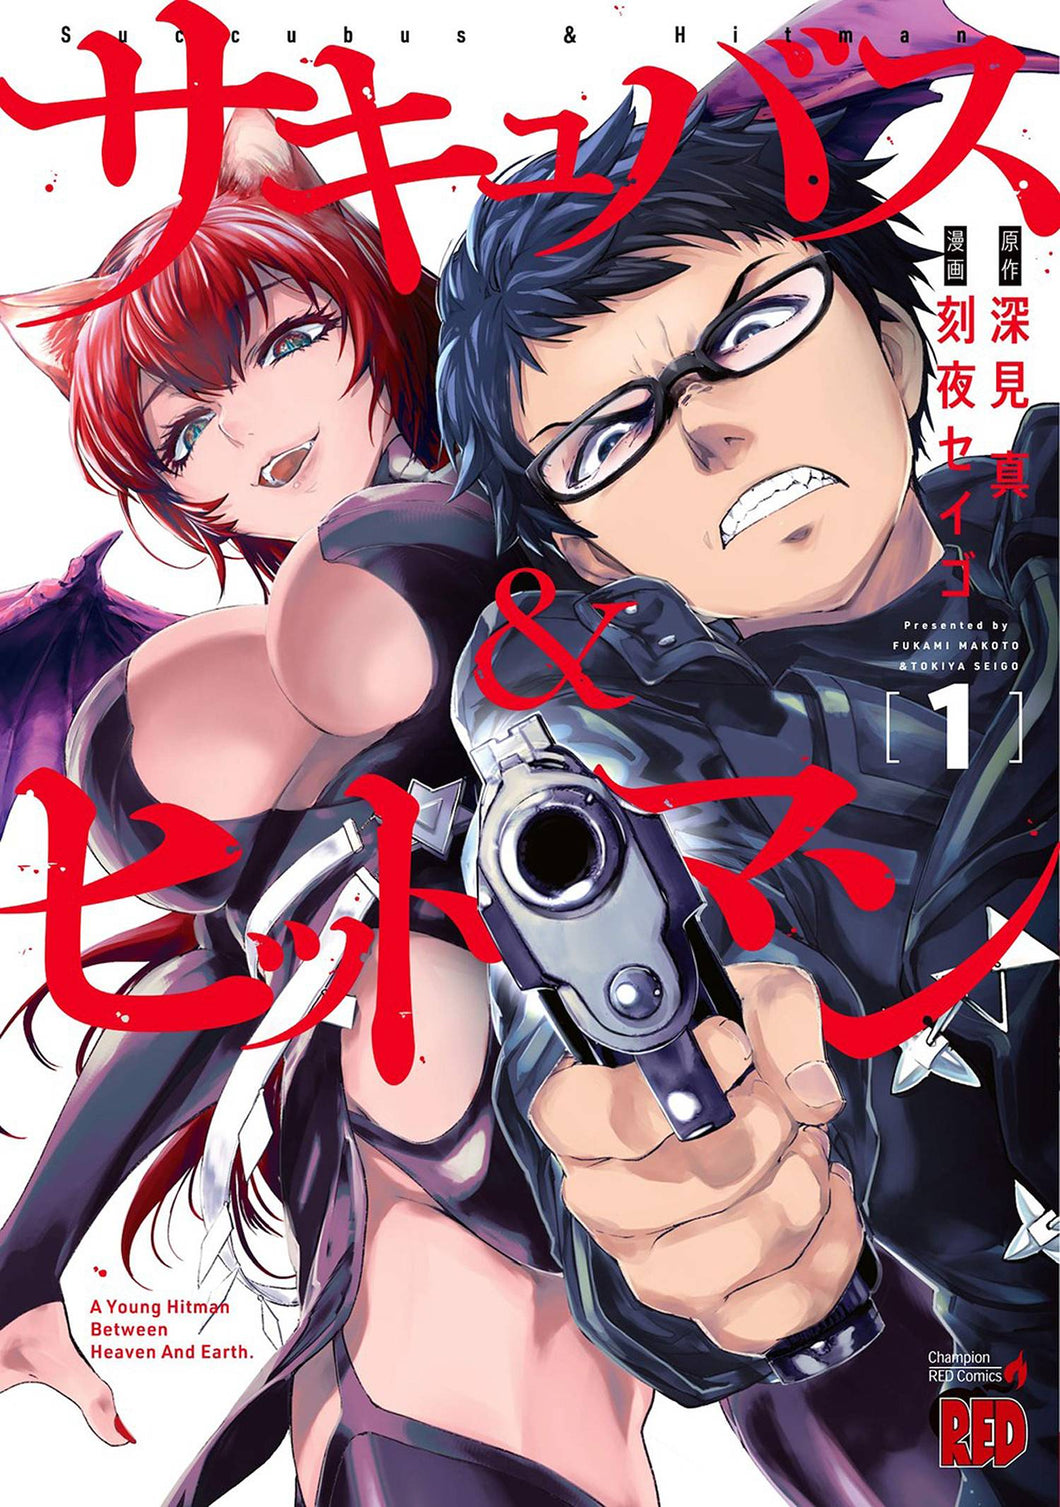 Succubus and Hitman GN Vol 01 - Books